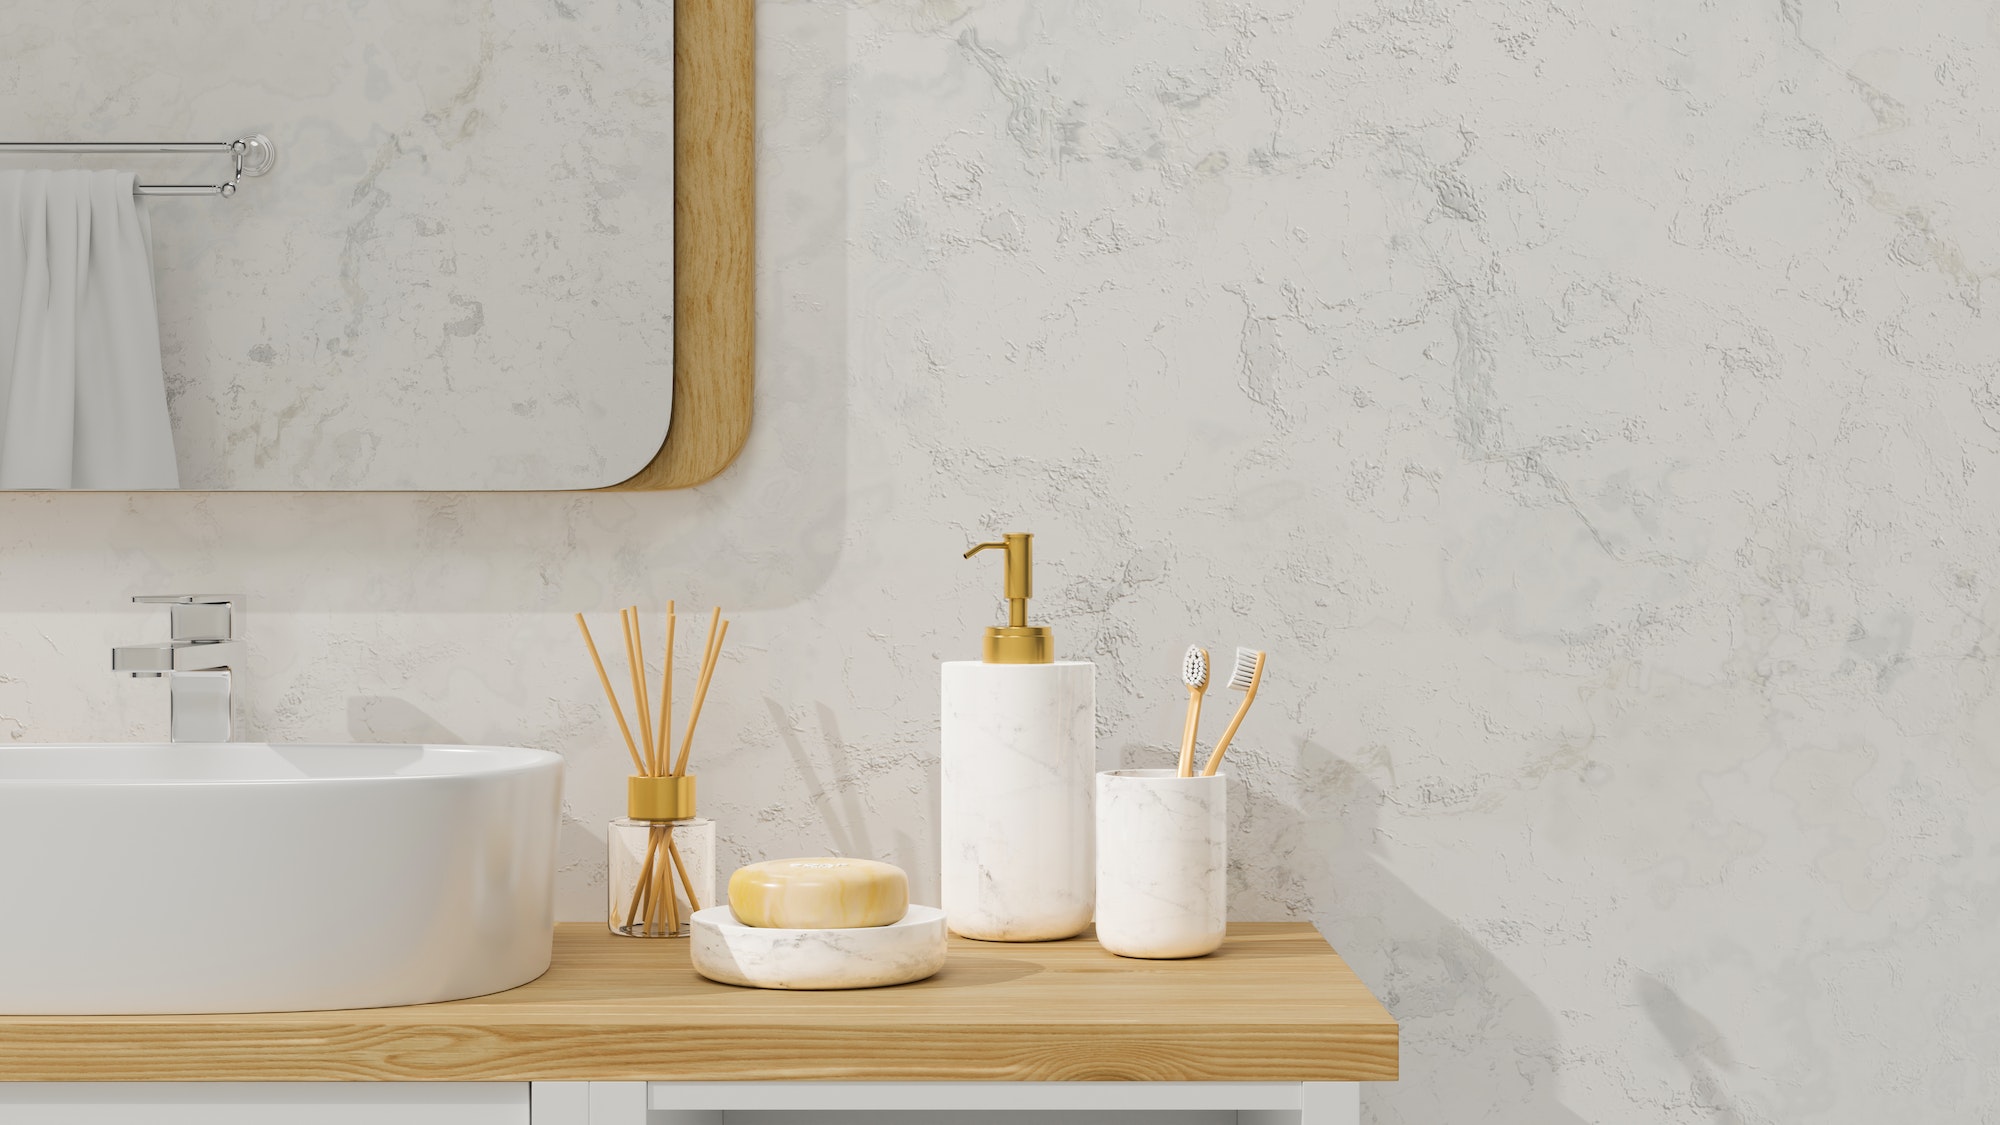 Modern bathroom interior with vessel sink, diffusers, soap, toothbrush, shampoo on wooden countertop